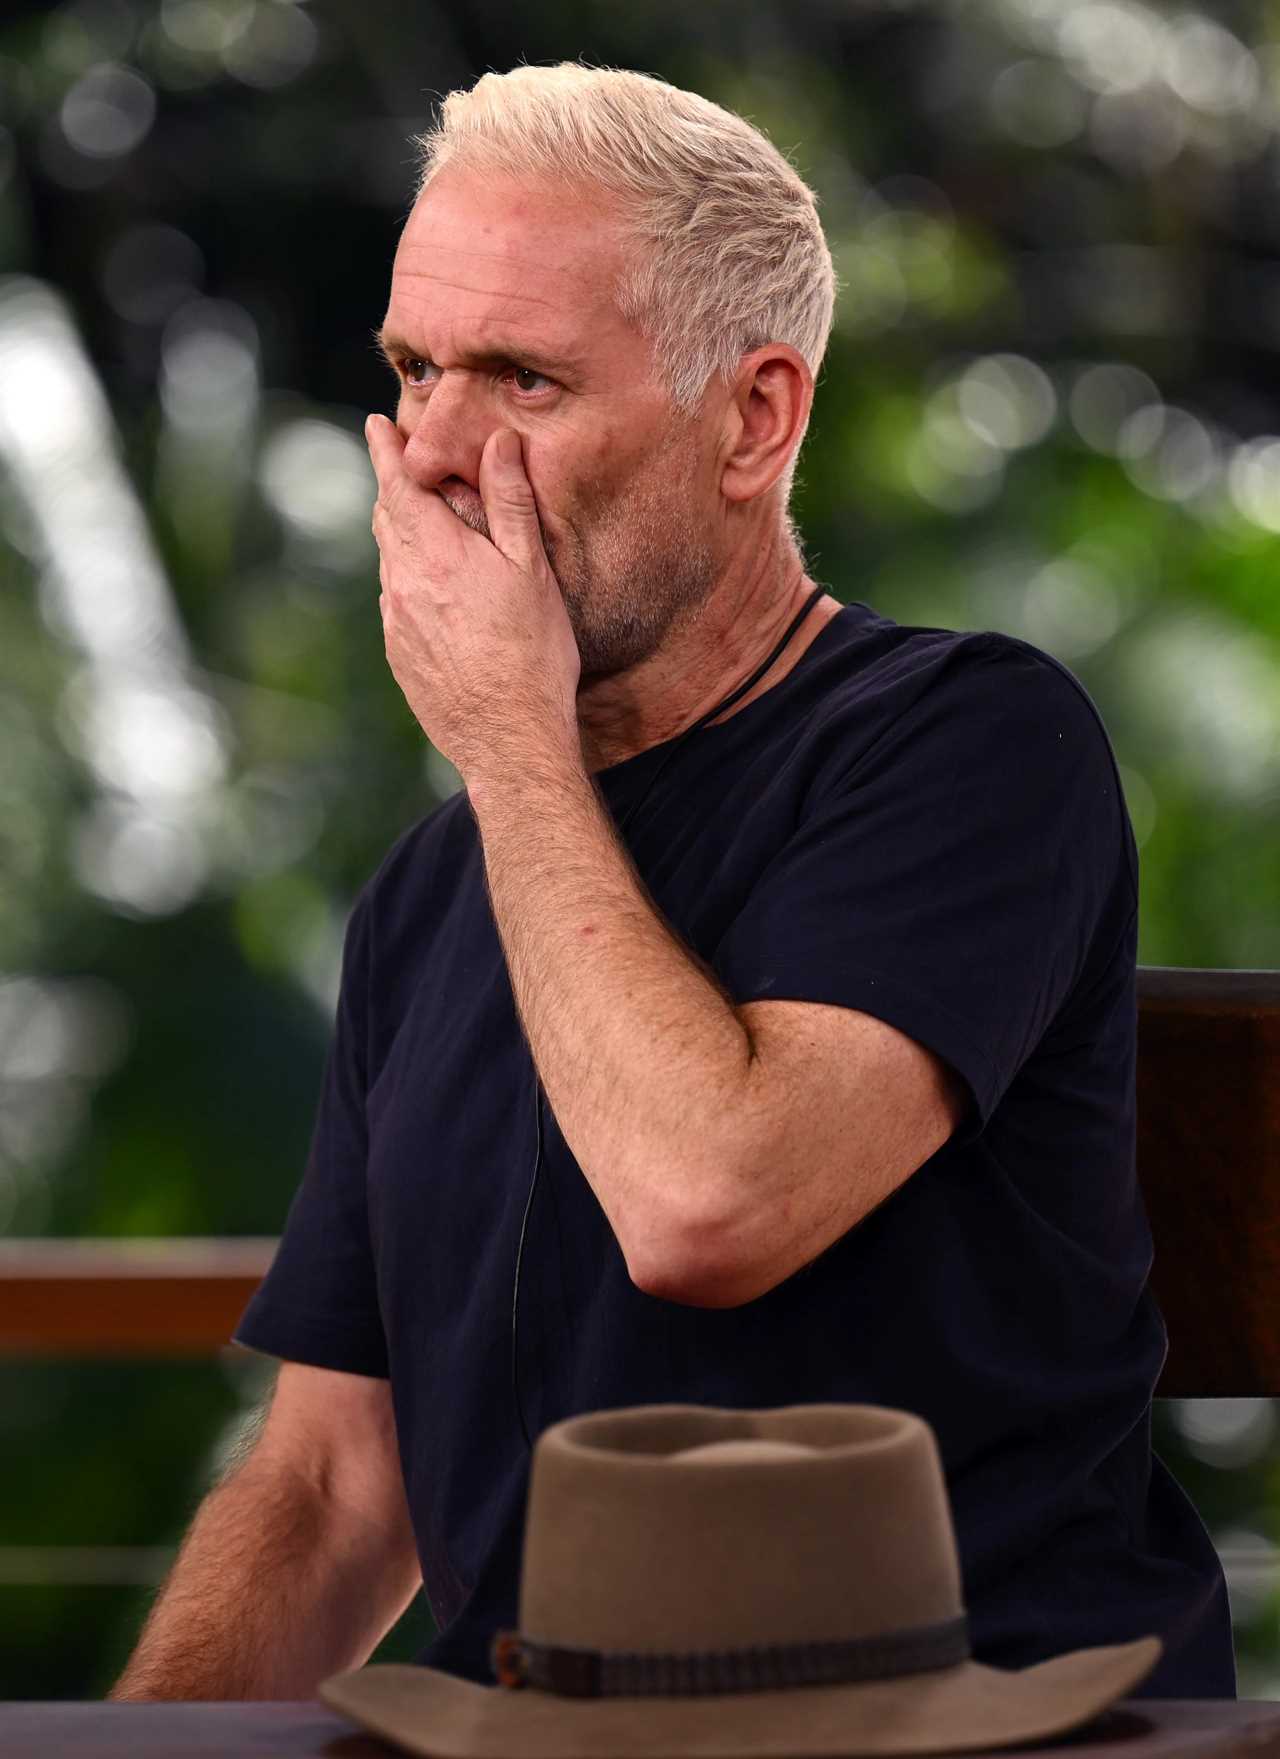 I’m A Celeb’s Chris Moyles ‘confirms’ feud as he slams campmate as ‘fake’ and says they made him walk out